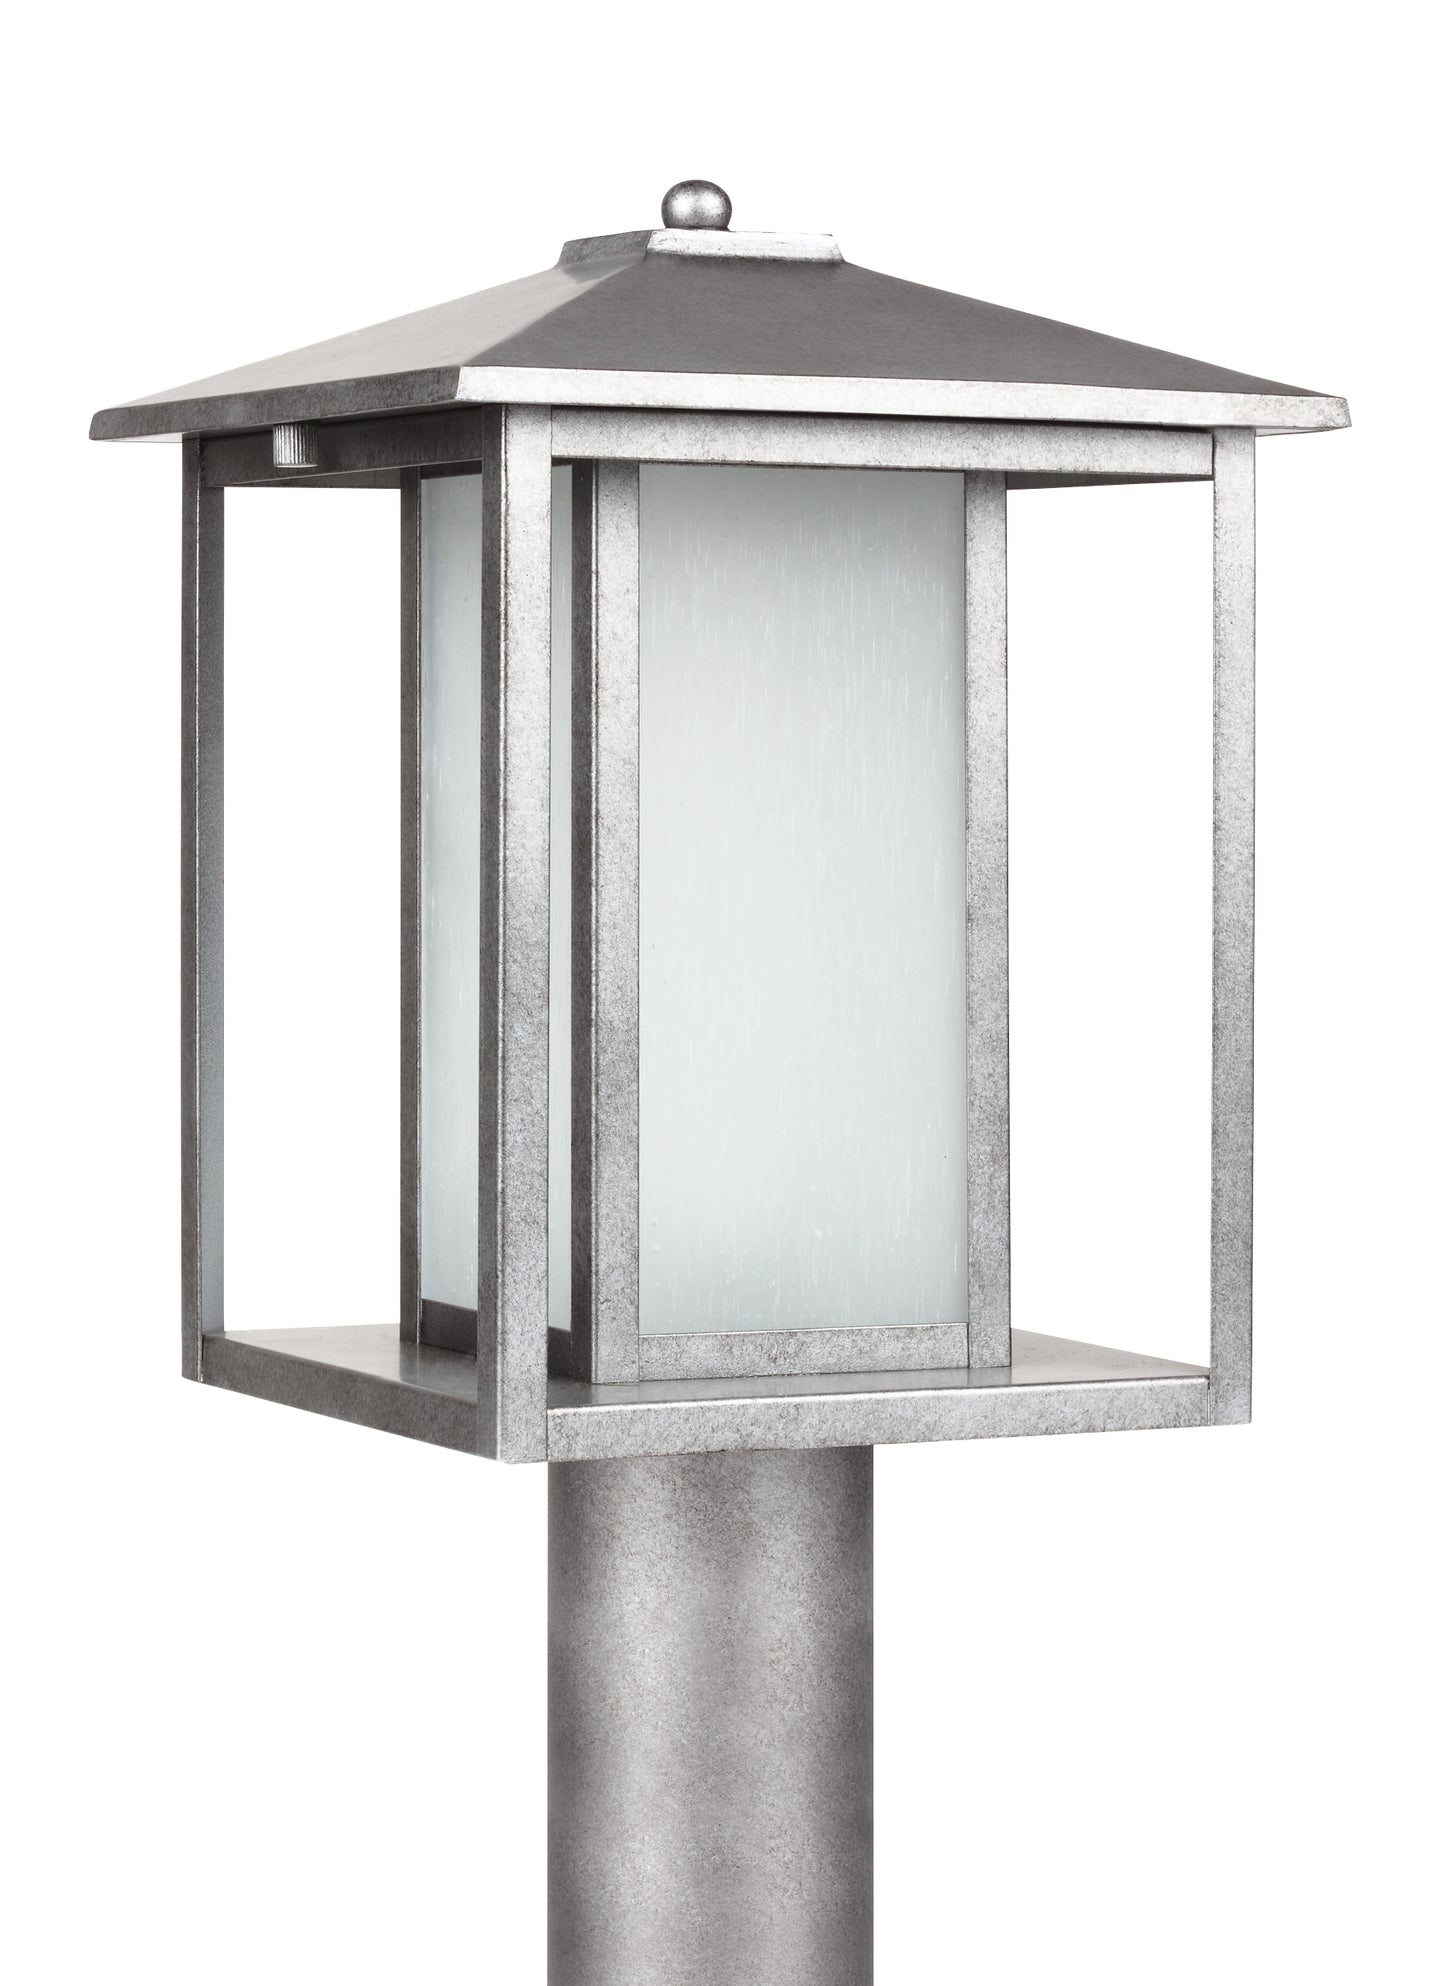 Hunnington contemporary 1-light outdoor exterior post lantern in weathered pewter grey finish with etched seeded glass panels